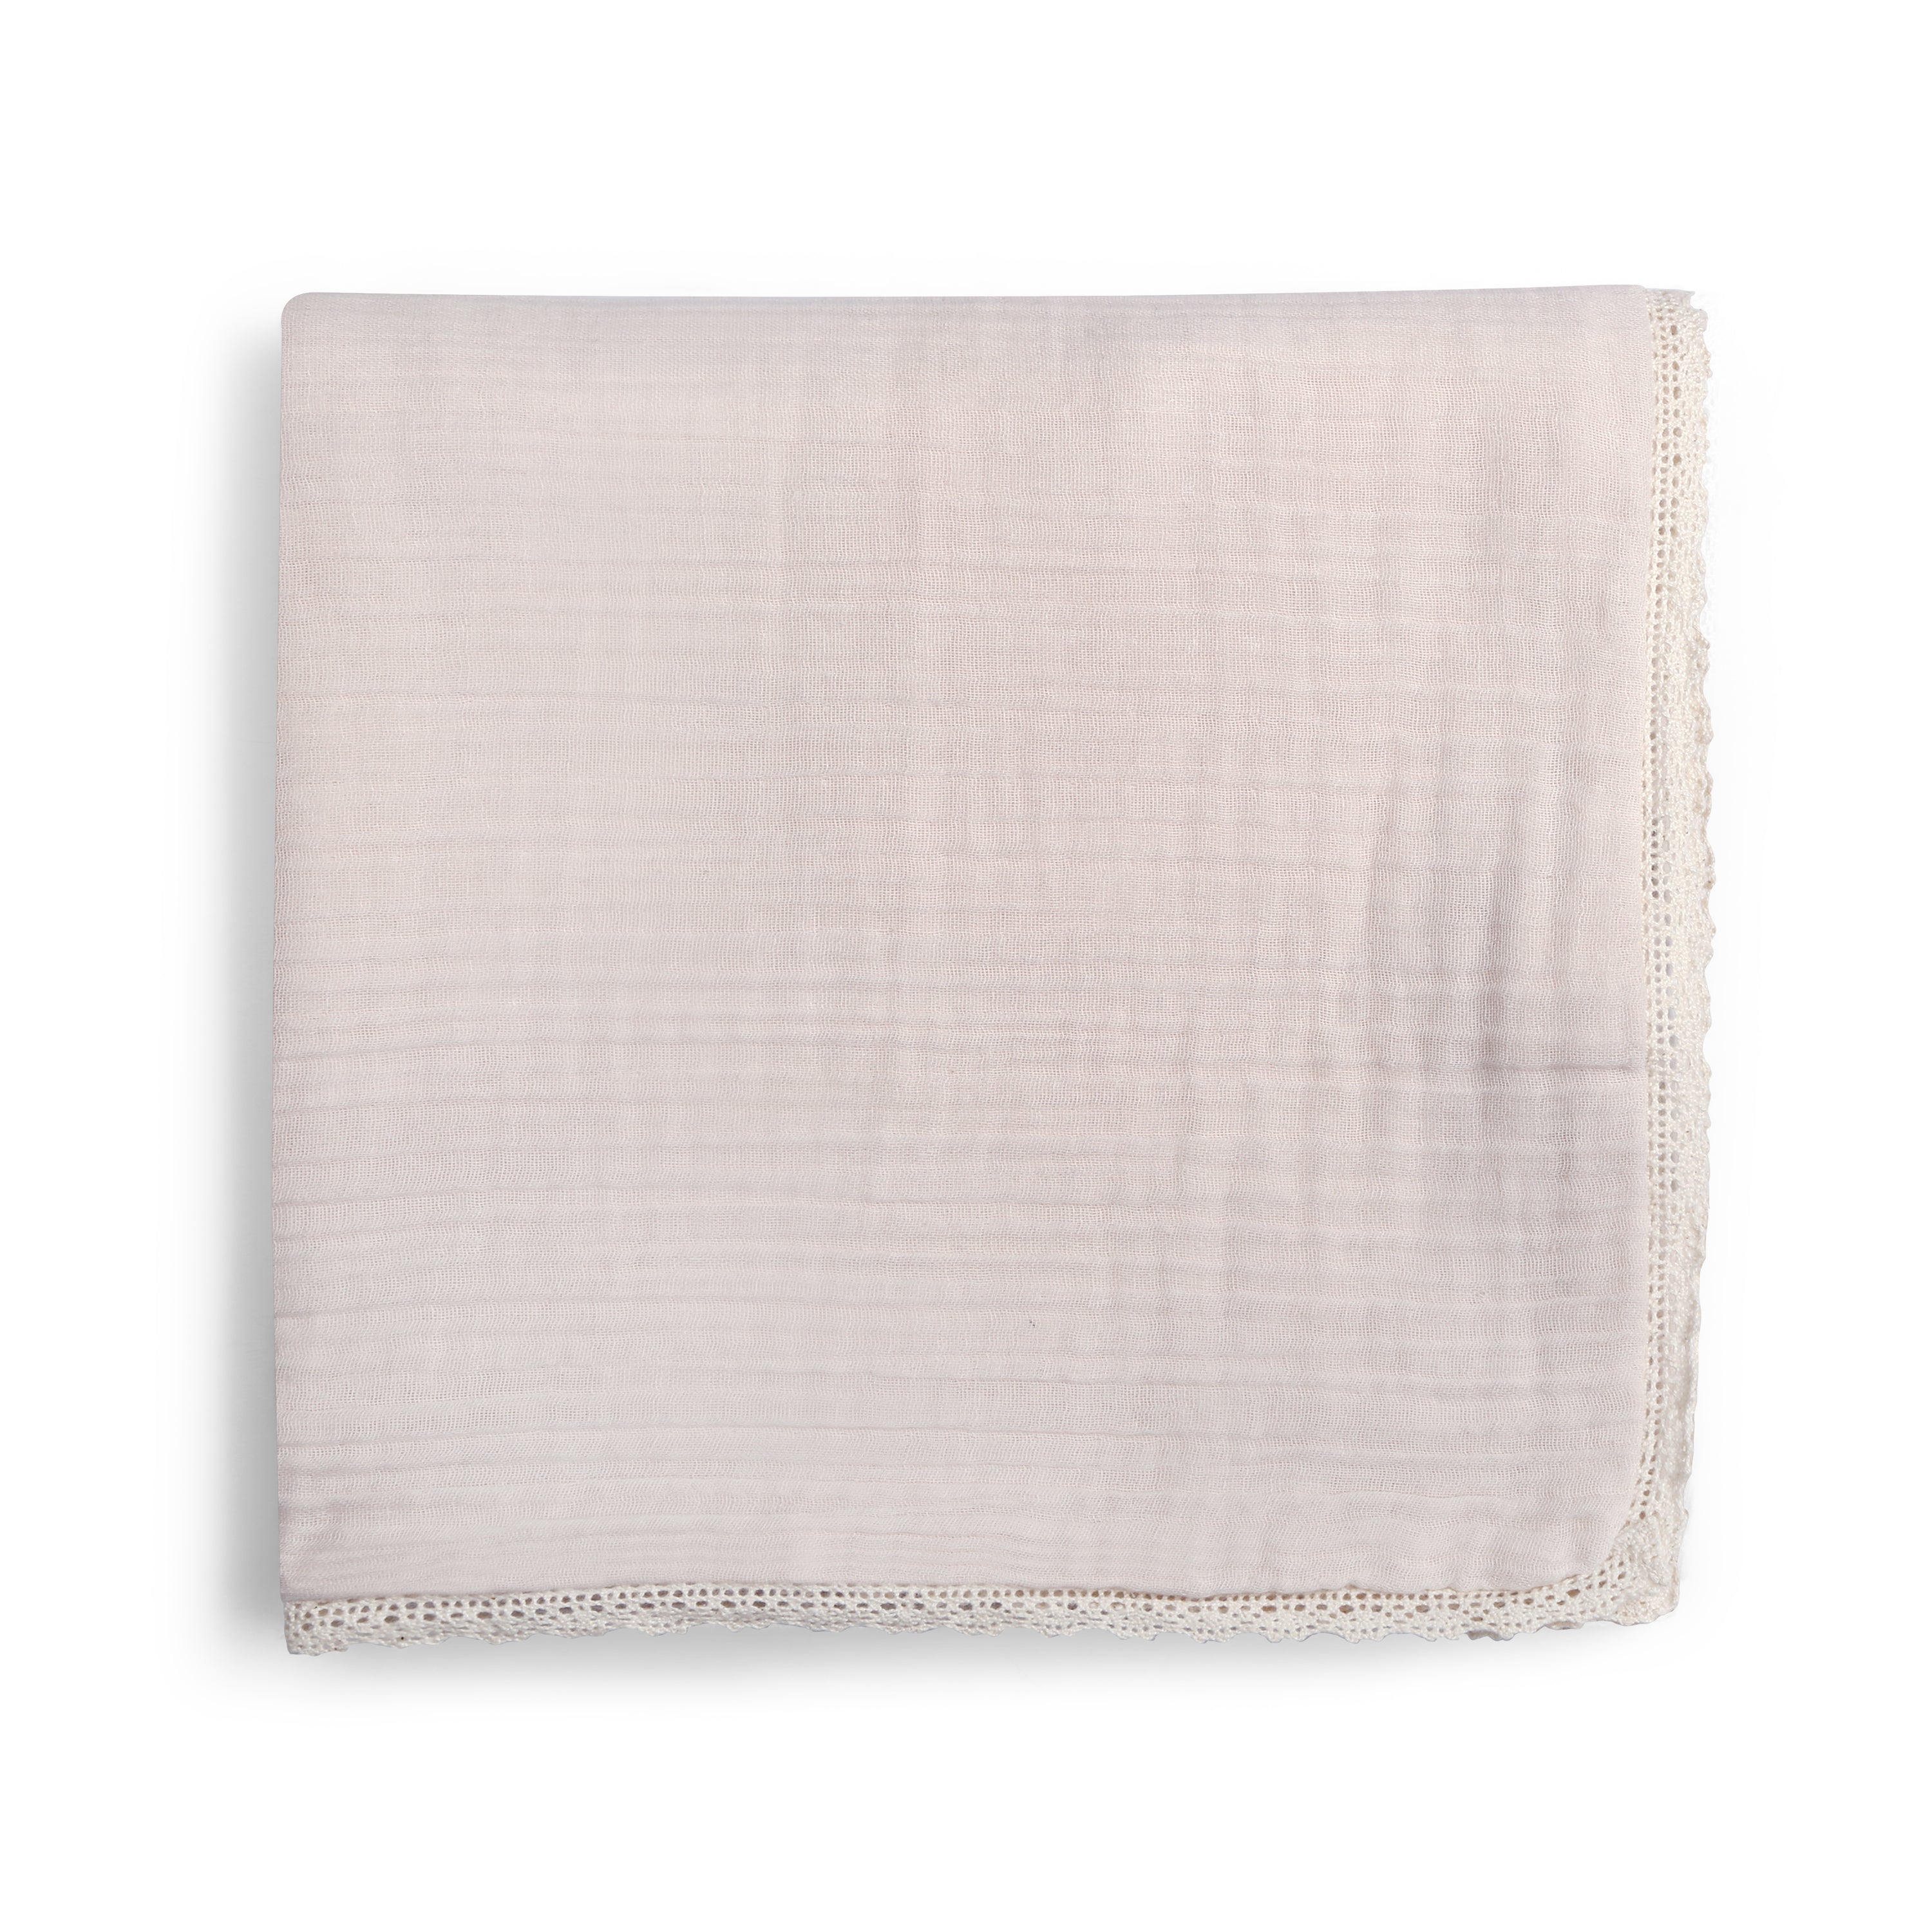 A single Organic Cotton Muslin Blanket in Blush Oat + Ivory Lace, neatly folded, displayed on a white background by Makemake Organics.